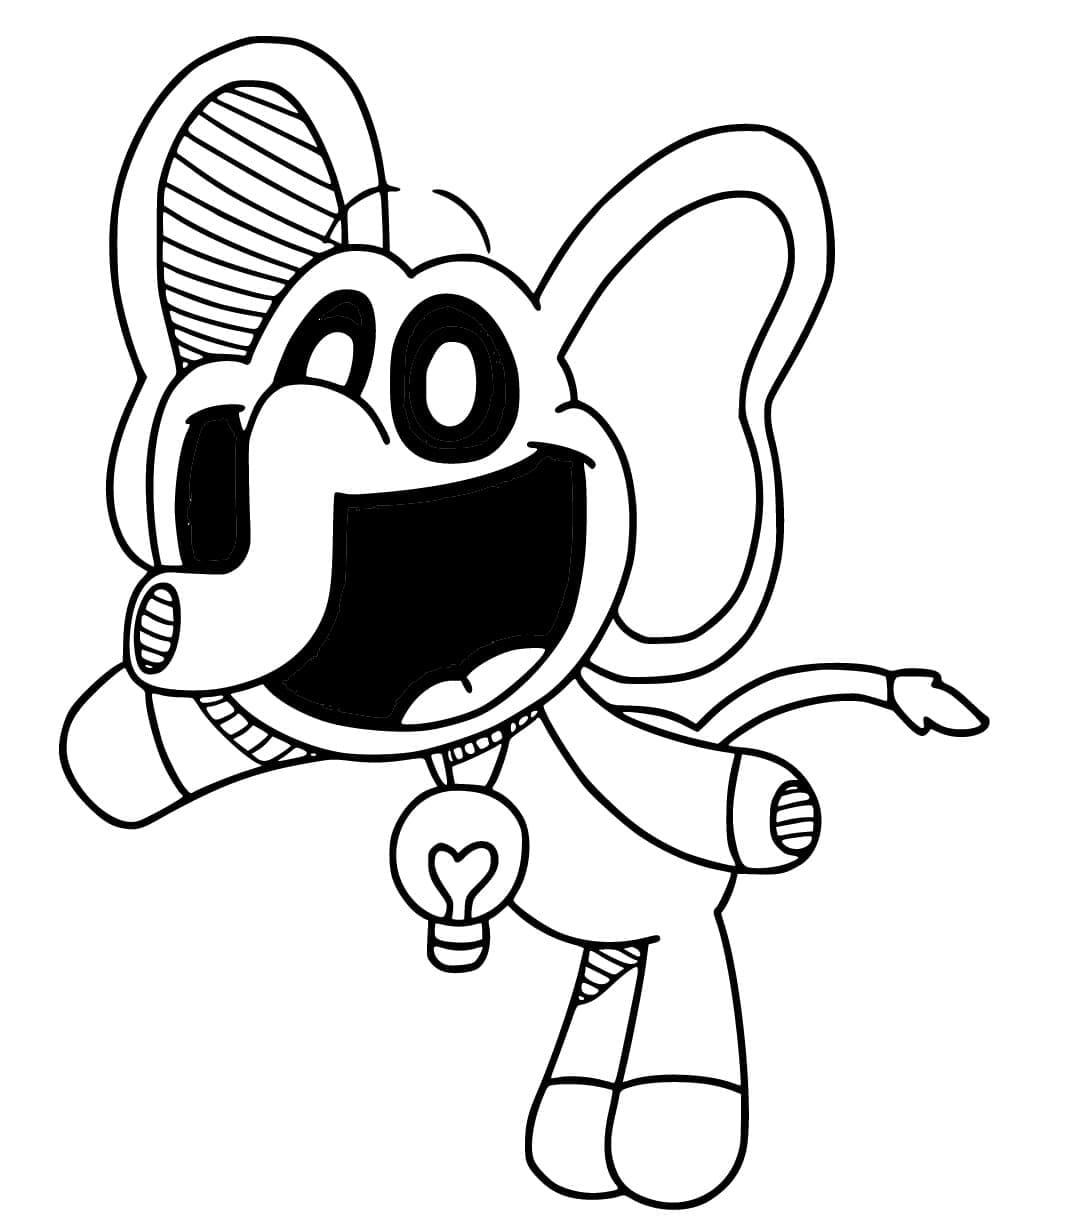 Bubba Bubbaphant Smiling Critters coloring page